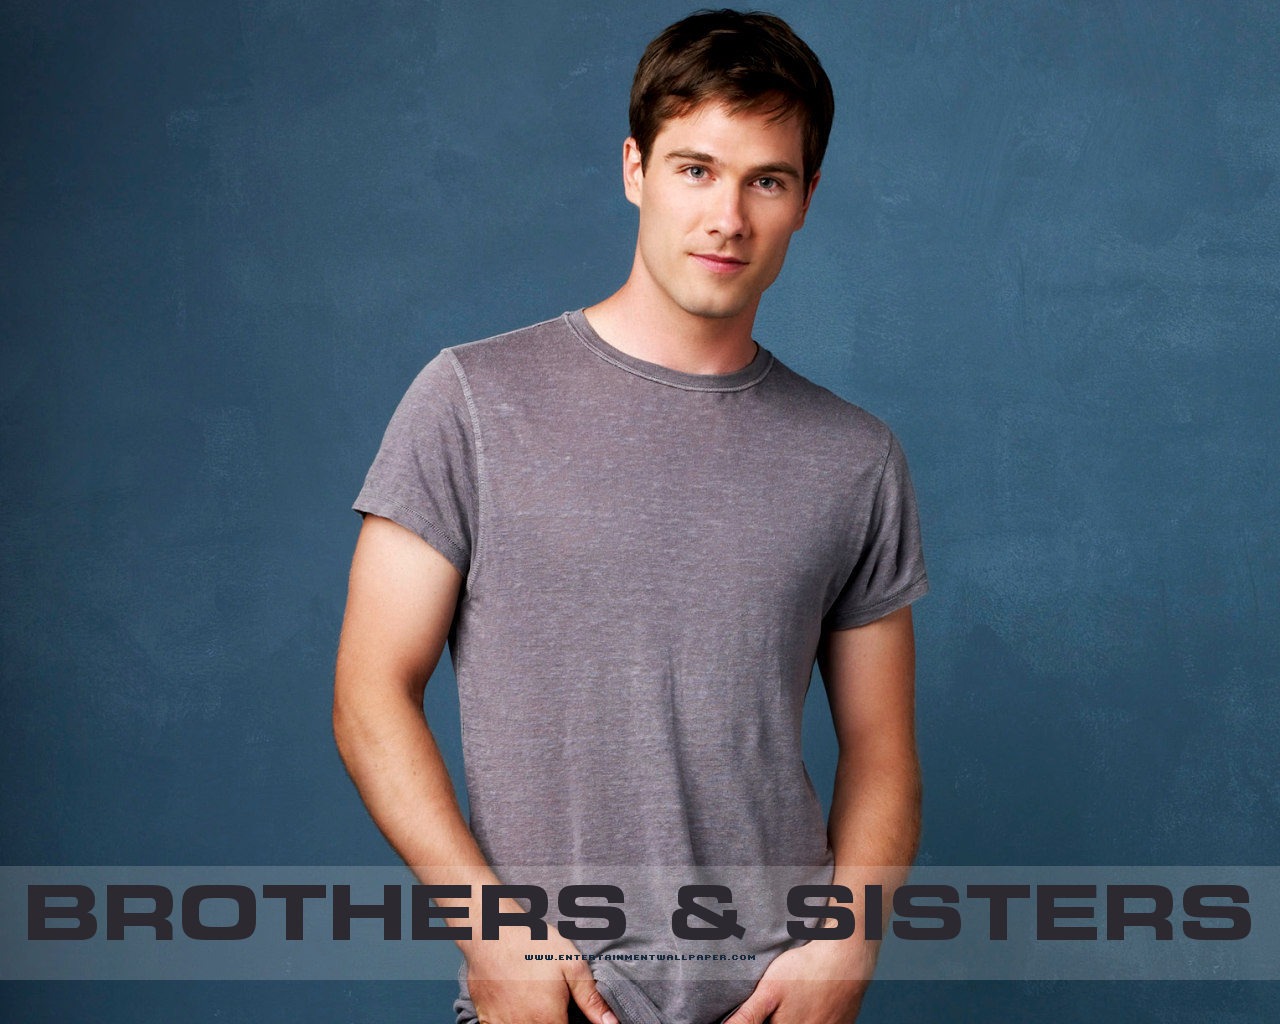 Brothers & Sisters Tapete #20 - 1280x1024